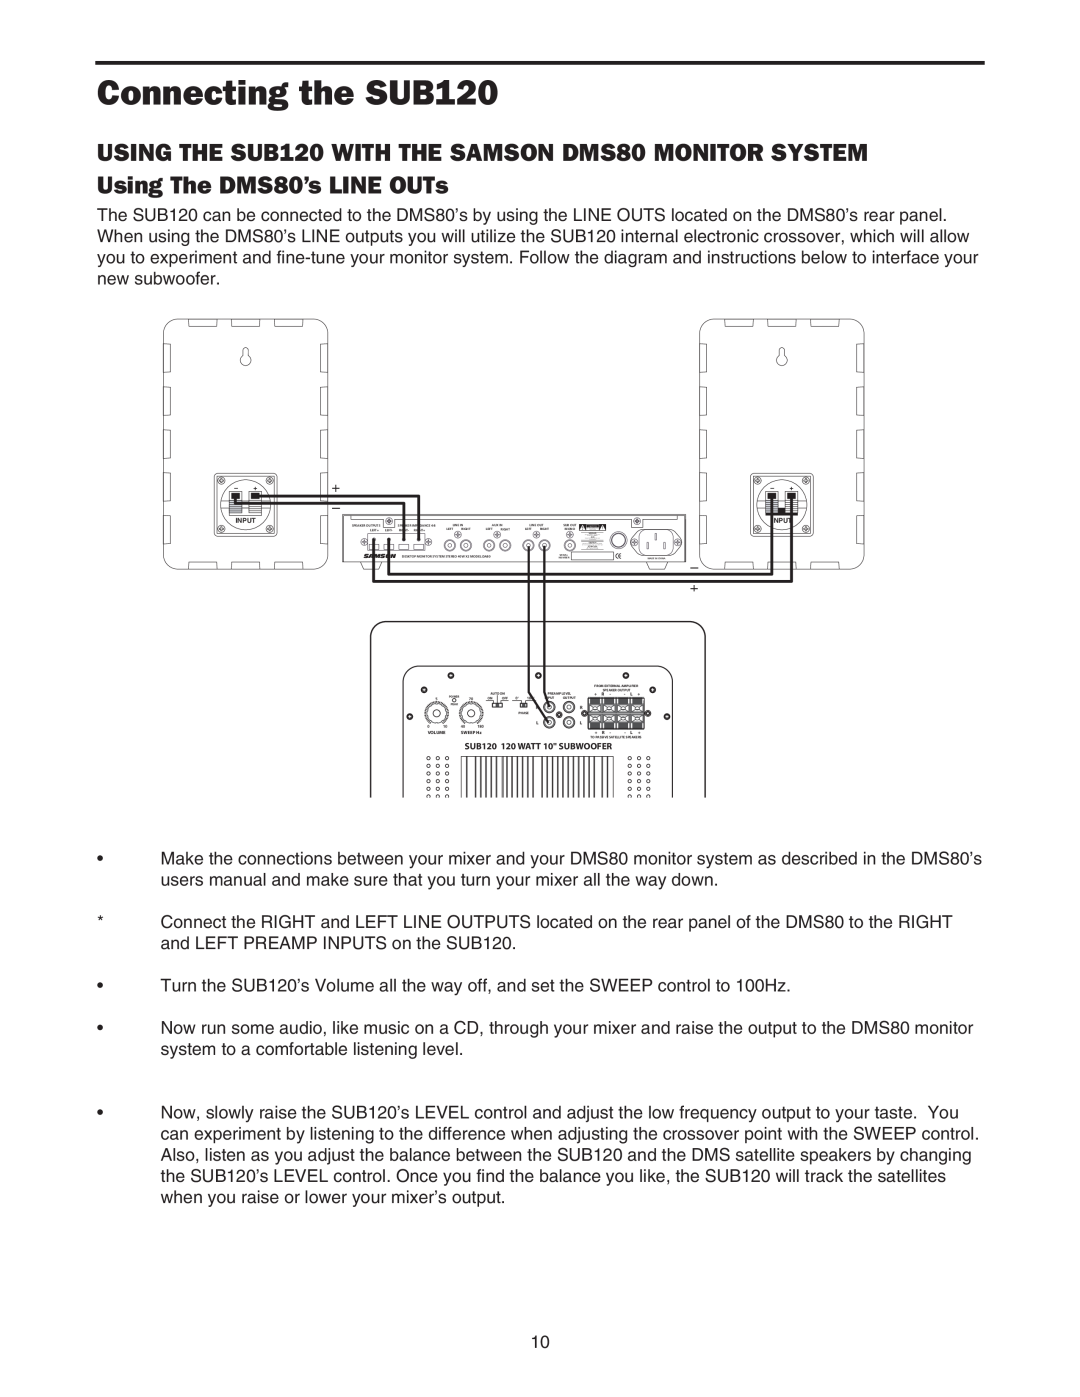 Samson Sub120 owner manual Connecting the SUB120 